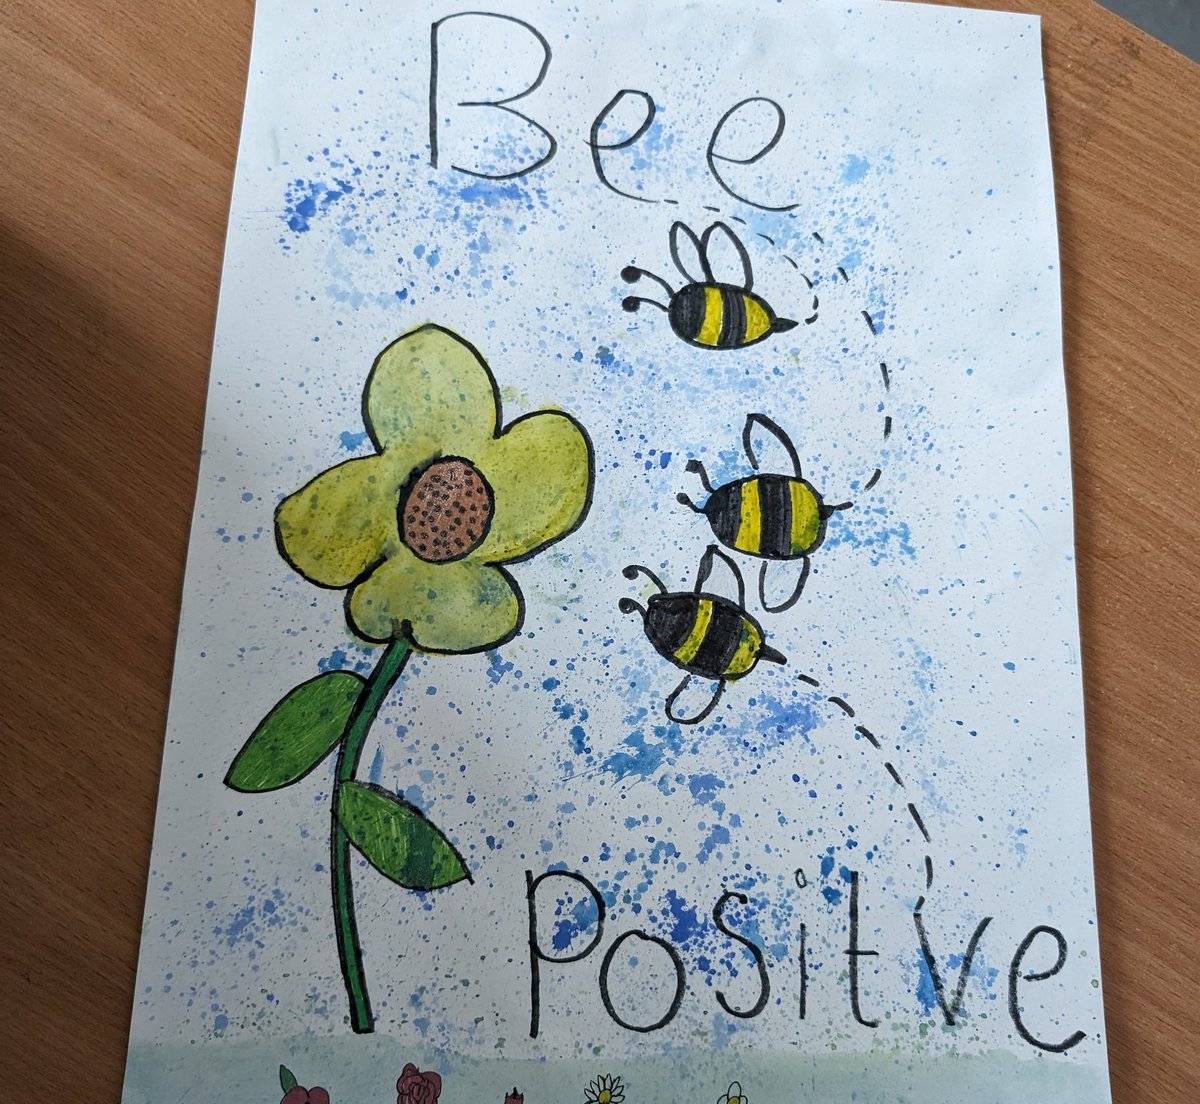 And our winner!! Bee Positive people!